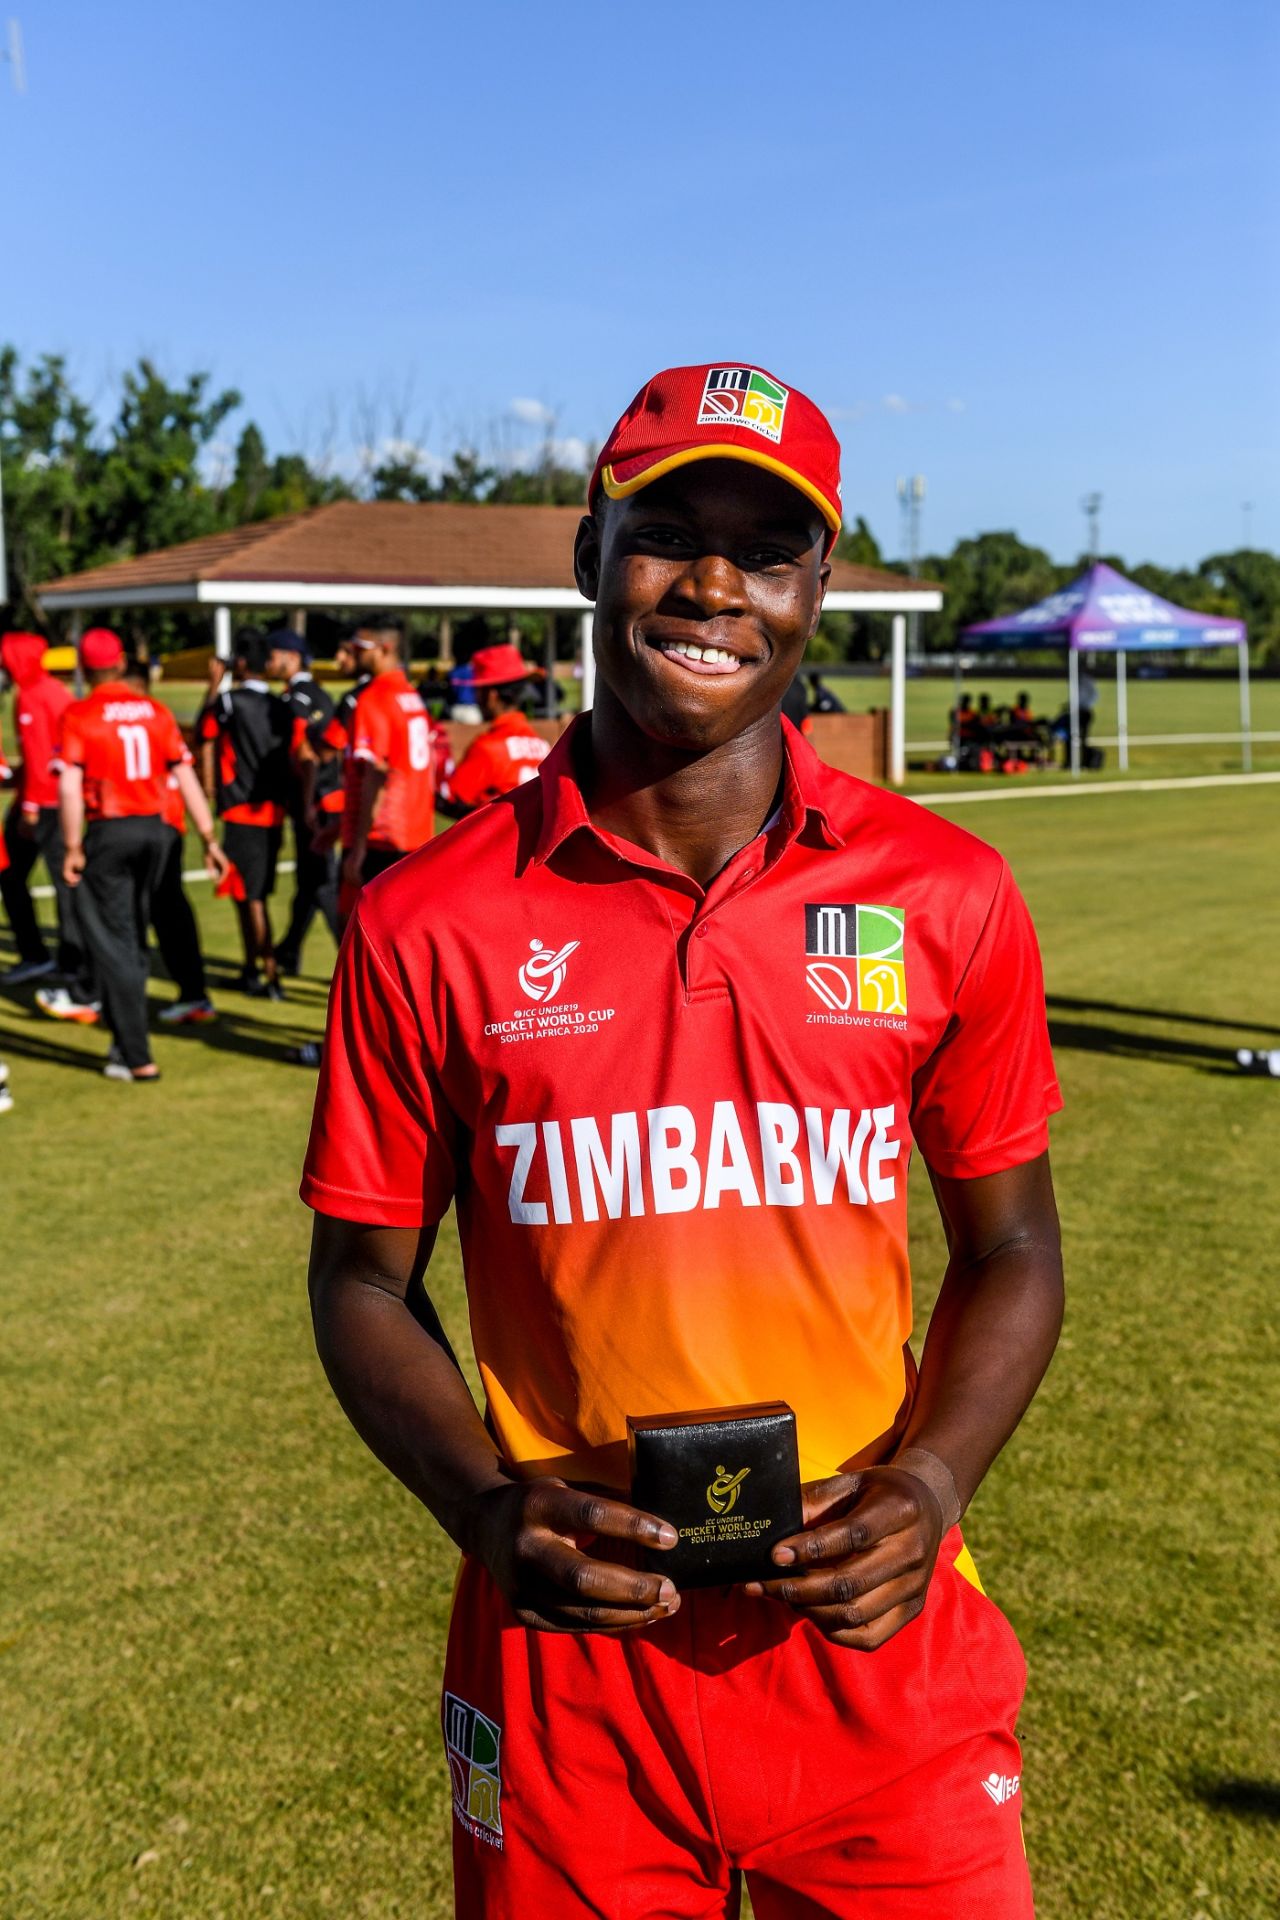 Emannuel Bawa had a good day with the bat, Zimbabwe v Canada, Under-19 World Cup 2020, Plate League quarter-final. Potchefstroom, January 28, 2020